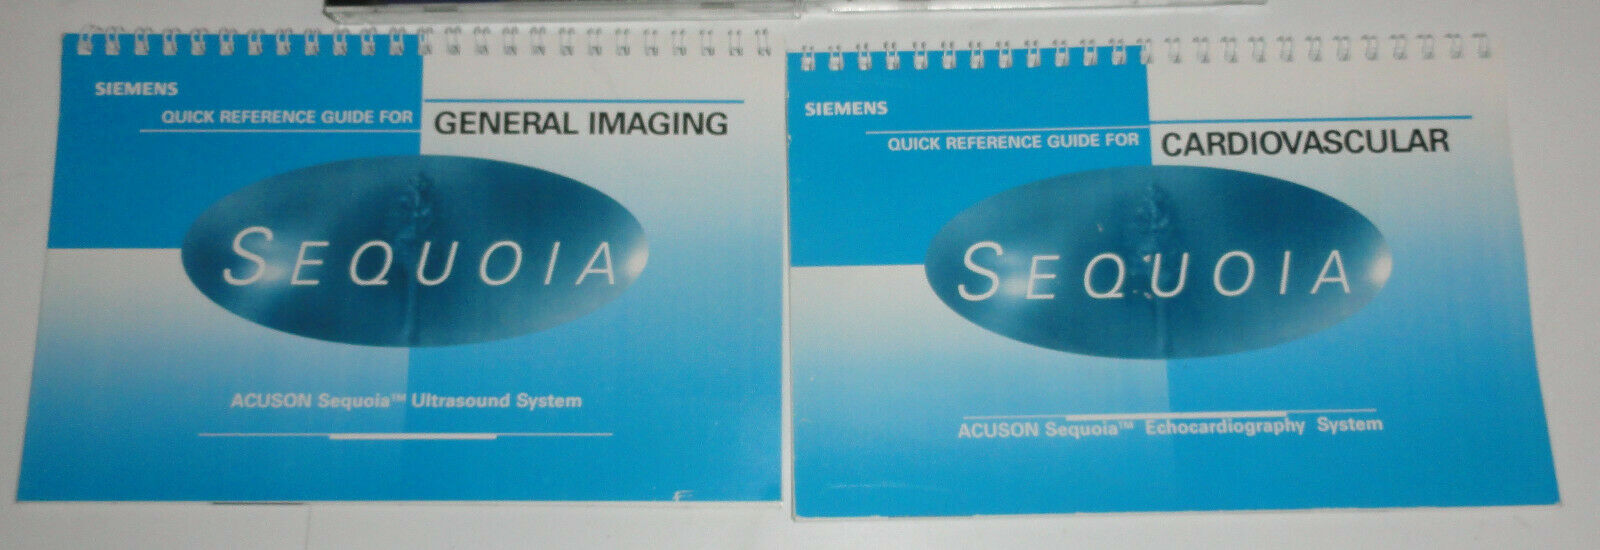 Siemens Sequoia Ultrasound User and Reference Manual